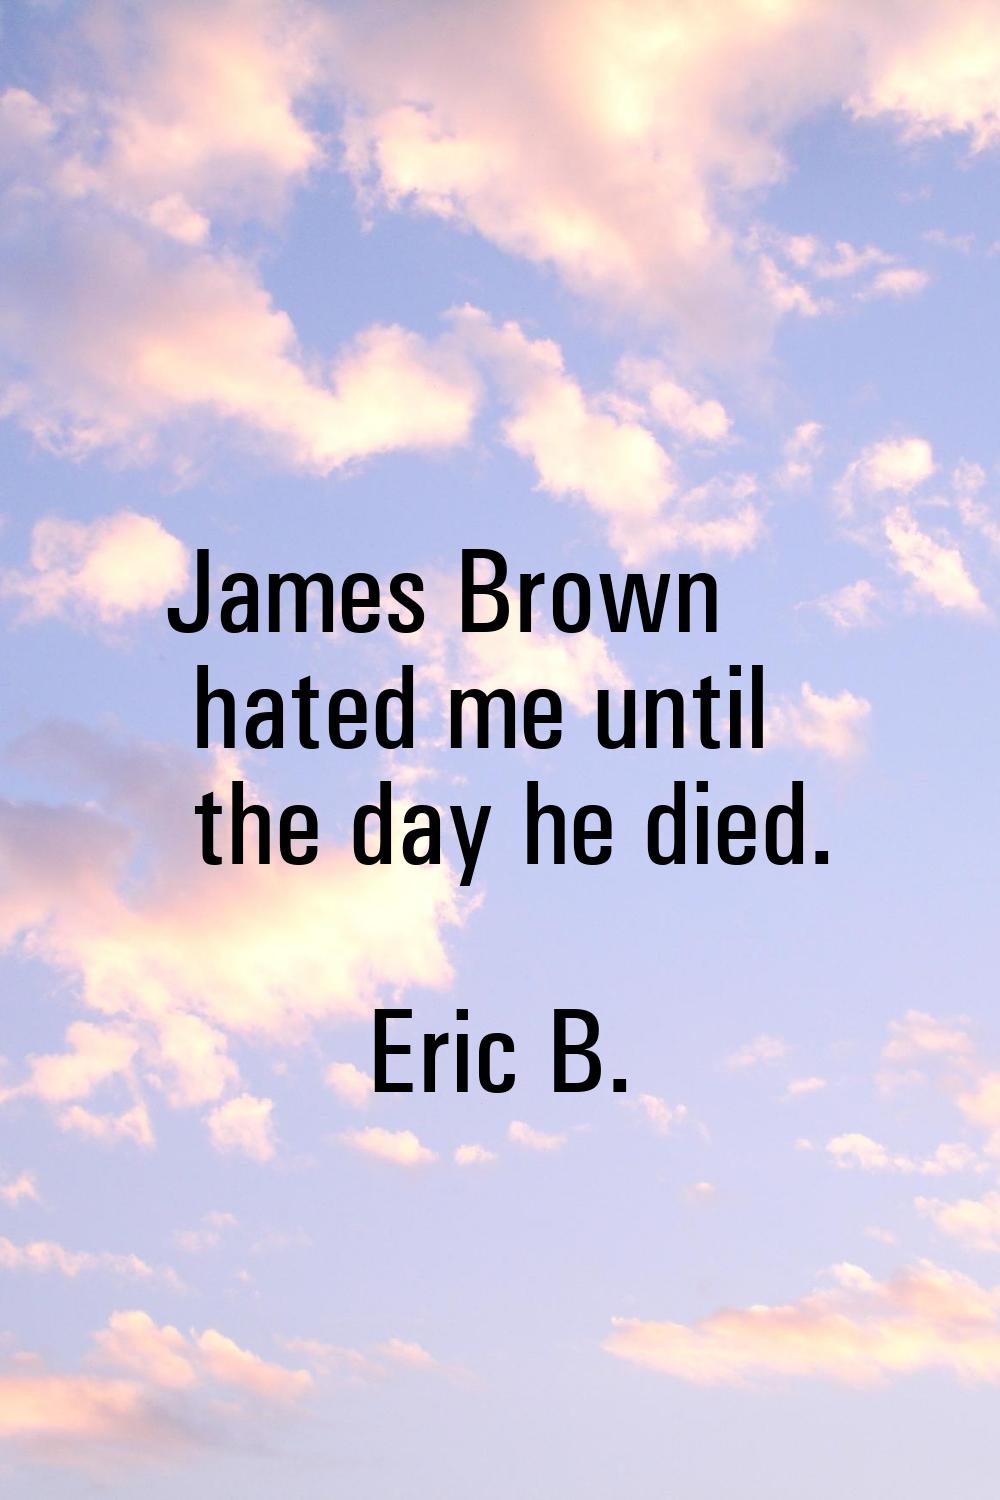 James Brown hated me until the day he died.